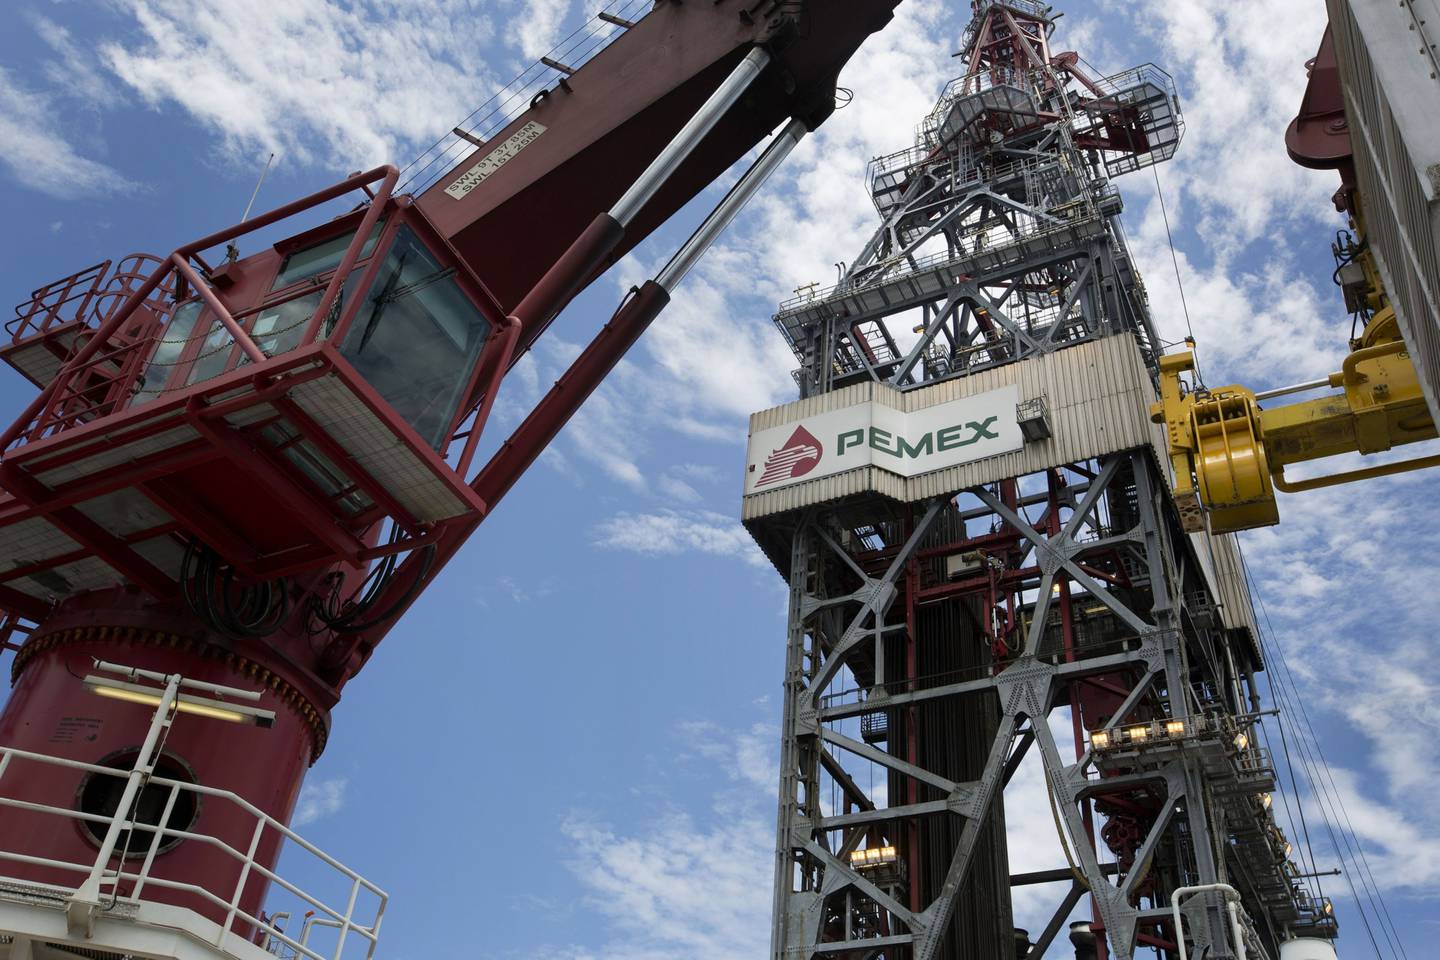 A crane stands next to Petroleos Mexicanos (Pemex) signage displayed on the company's La Muralla IV deep sea crude oil platform in the waters off Veracruz, Mexico, on Friday, Aug.30, 2013. Gulf of Mexico crudes strengthened on concern that the conflict in Syria might spread and threaten imports from the Middle East. Photographer: Susana Gonzalez/Bloomberg